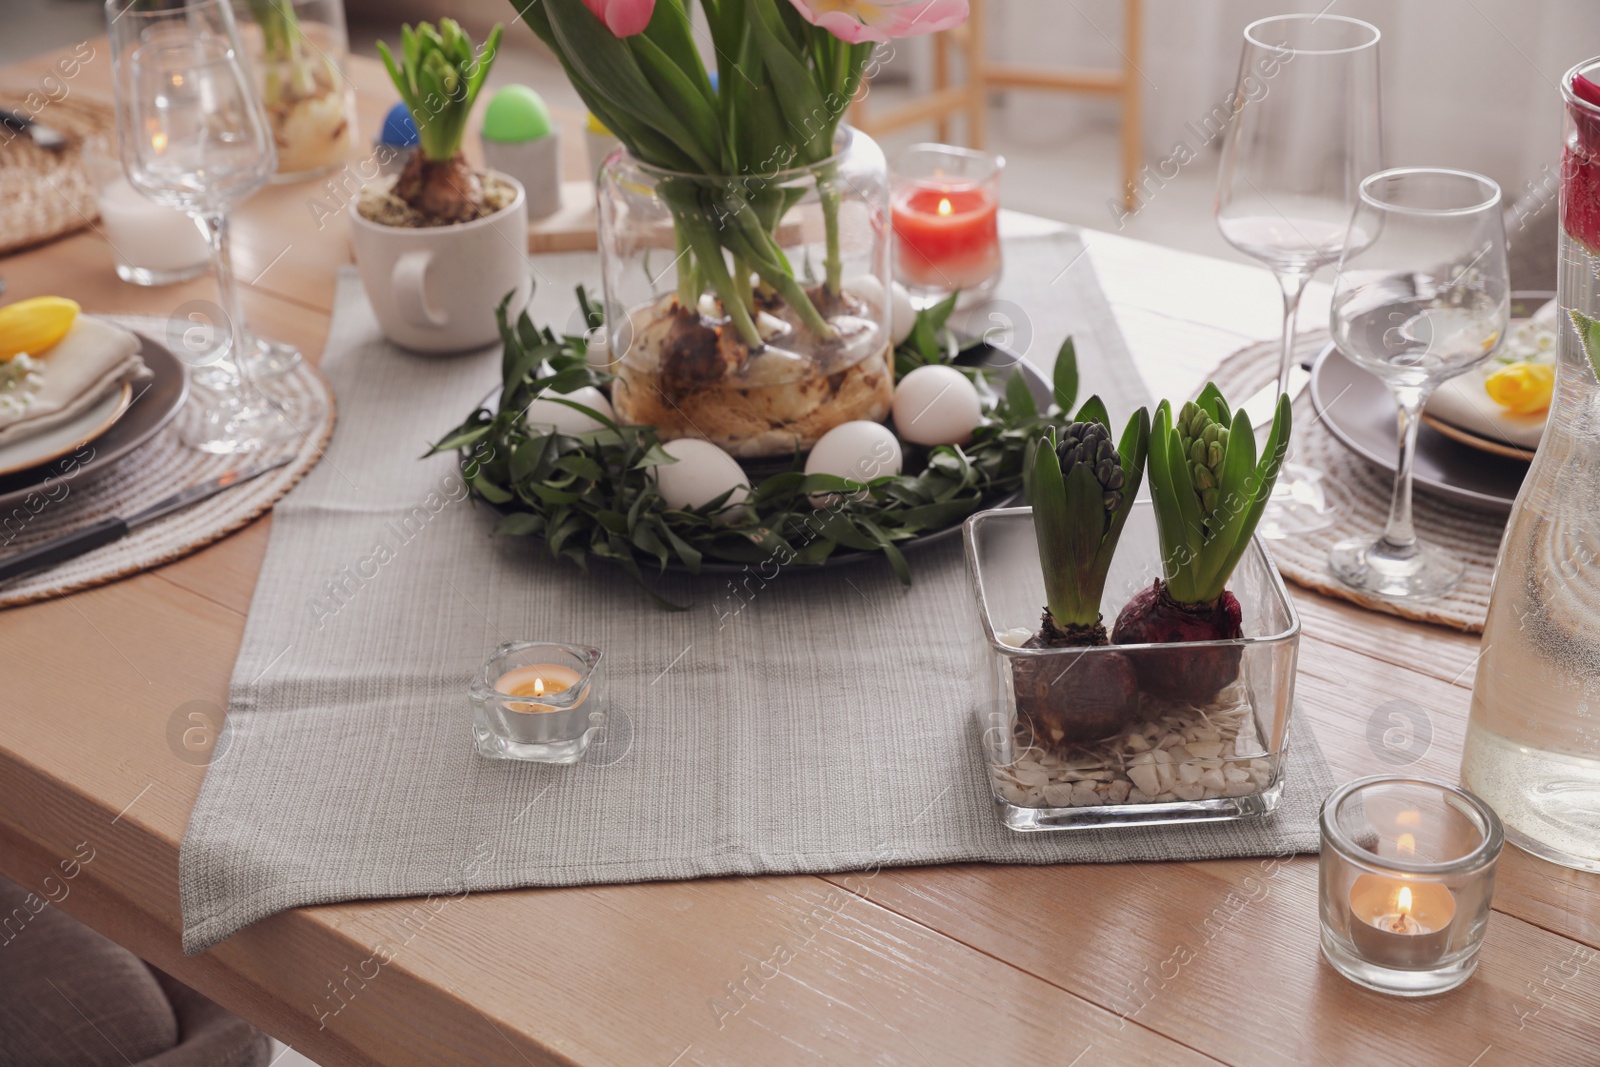 Photo of Beautiful Easter table setting with burning candles indoors